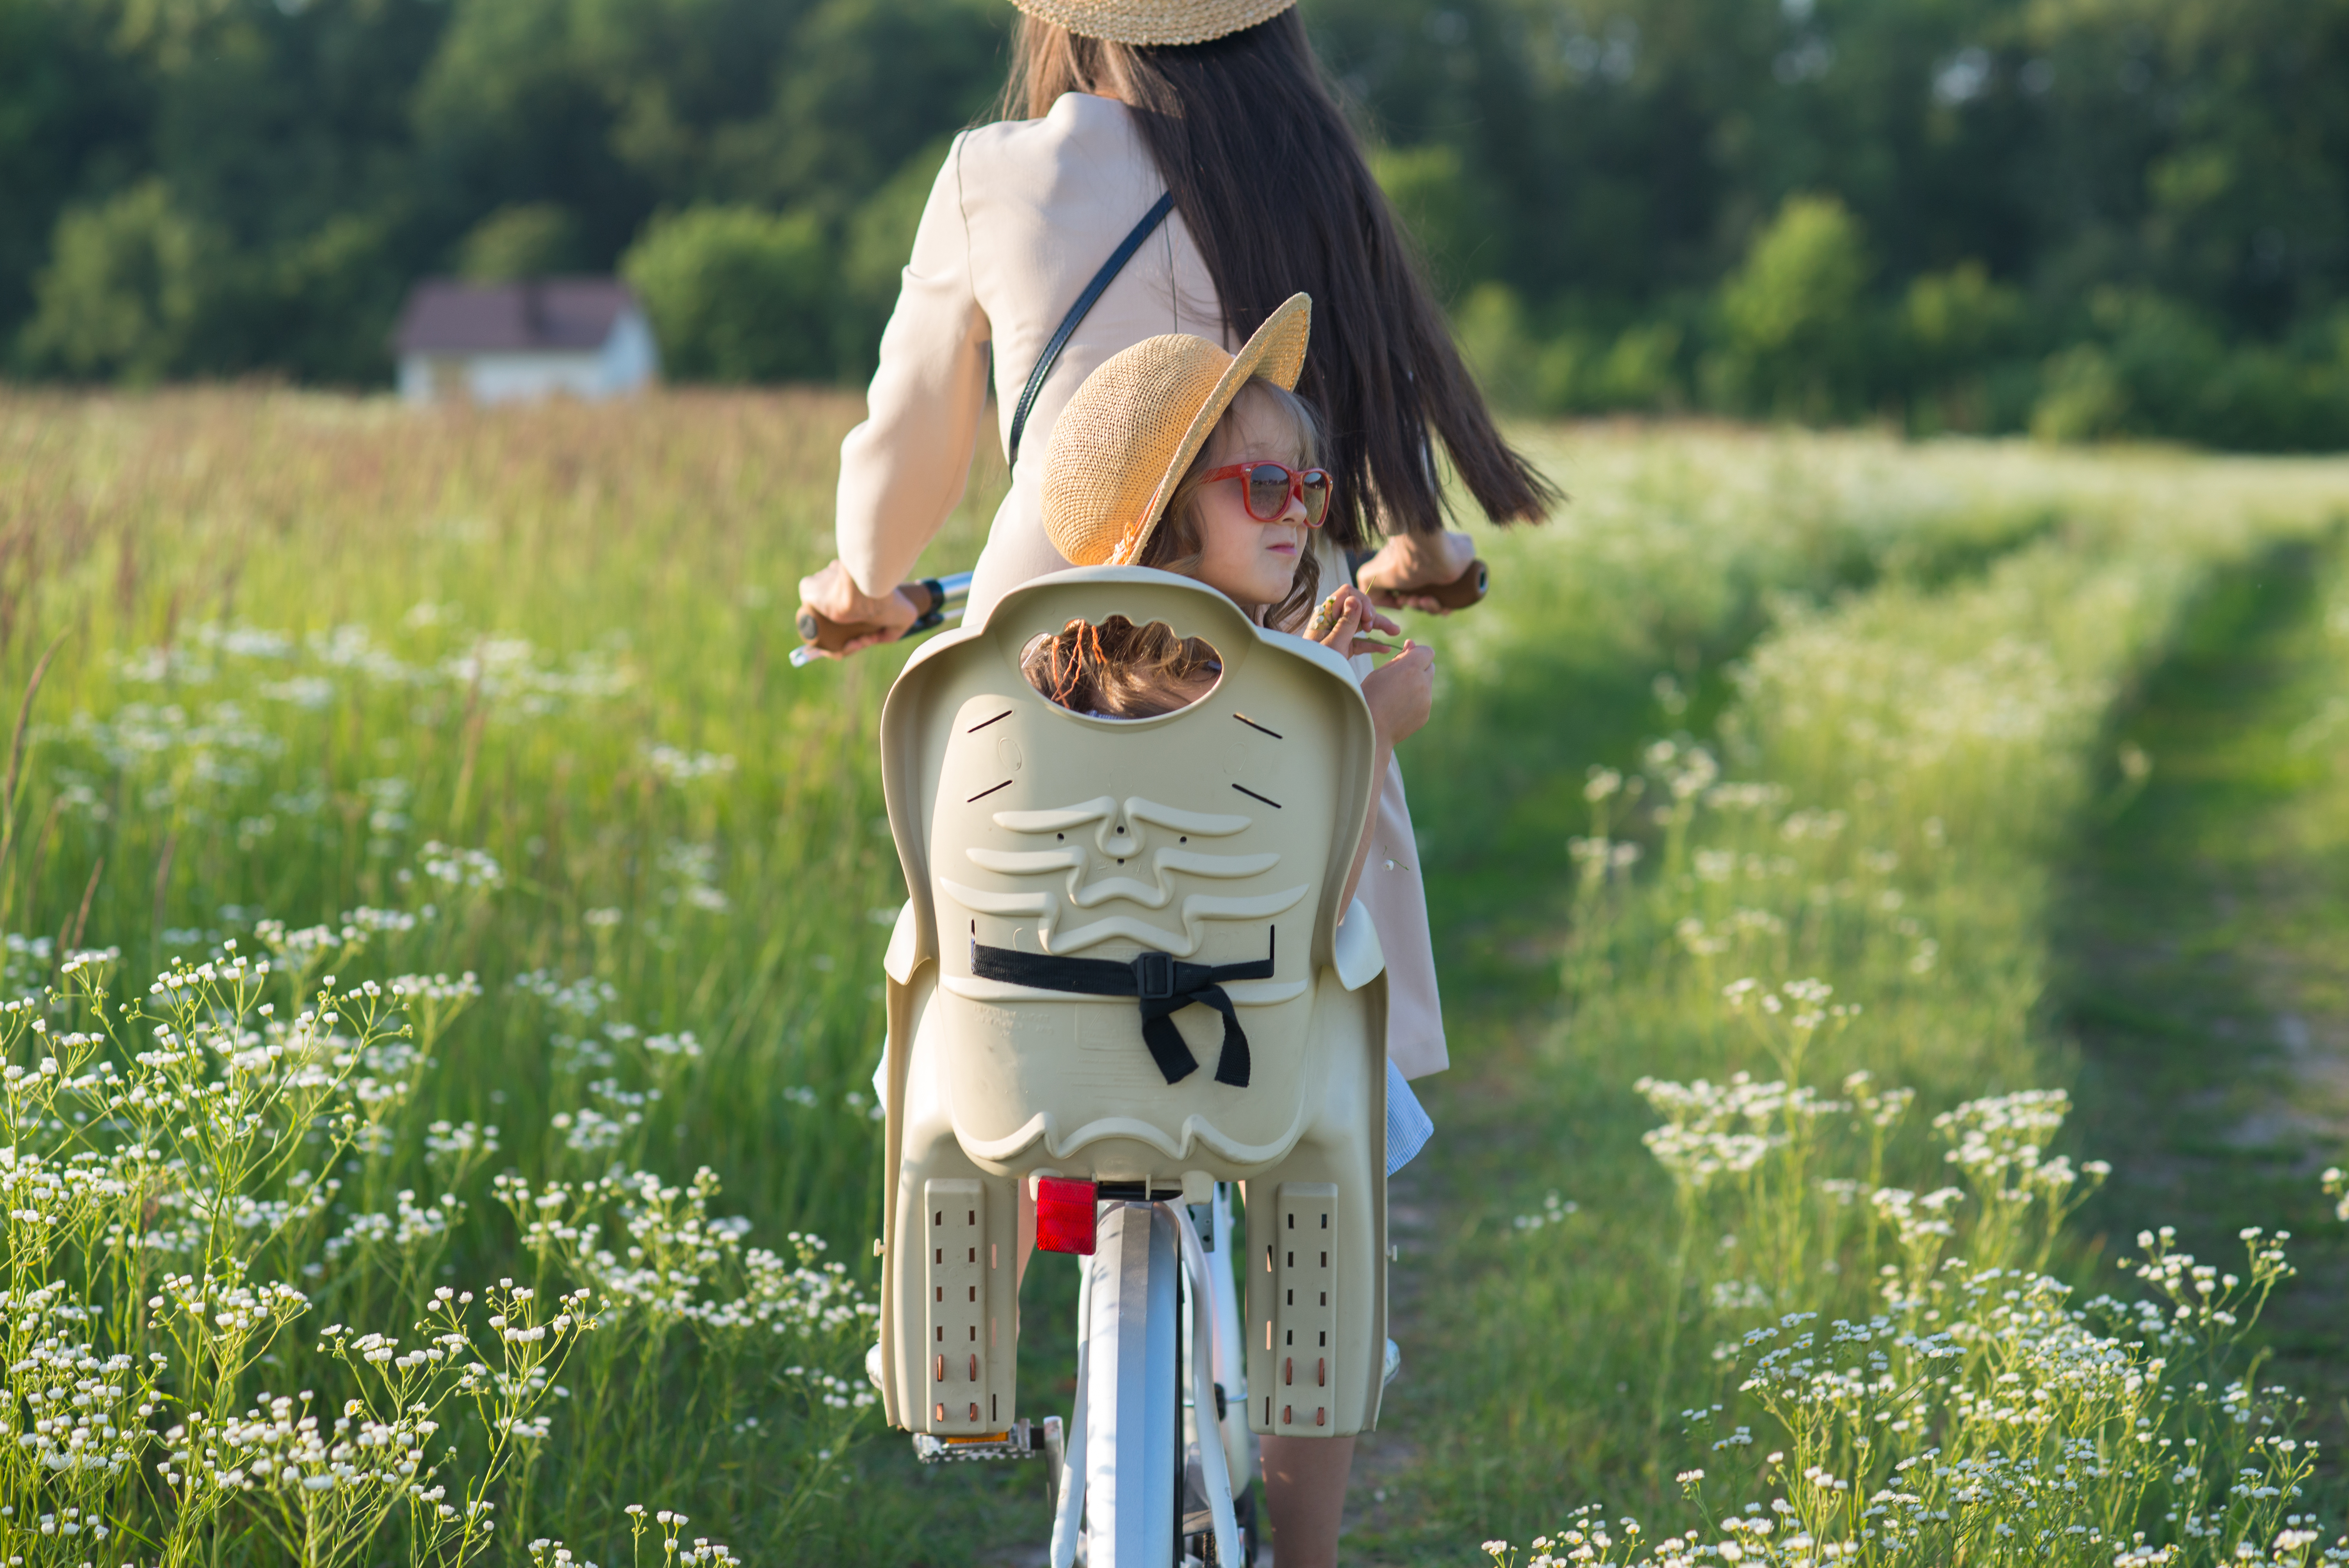 Bike seat vs. bike trailer: Which is safer for your kid?